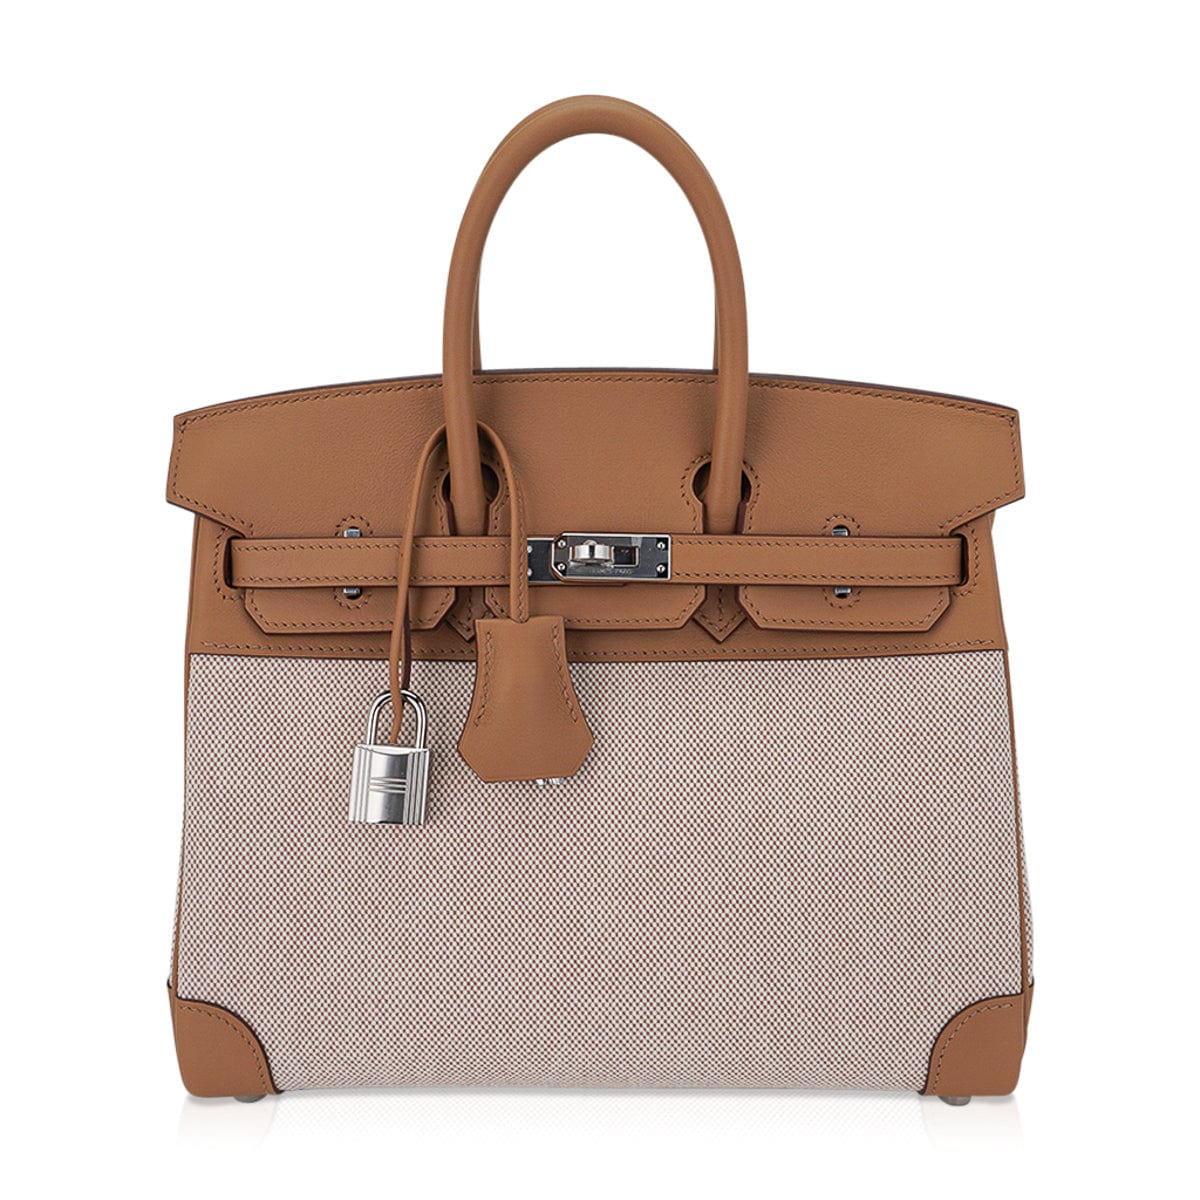 The Most Sought After Birkin: The Birkin 25, Handbags and Accessories